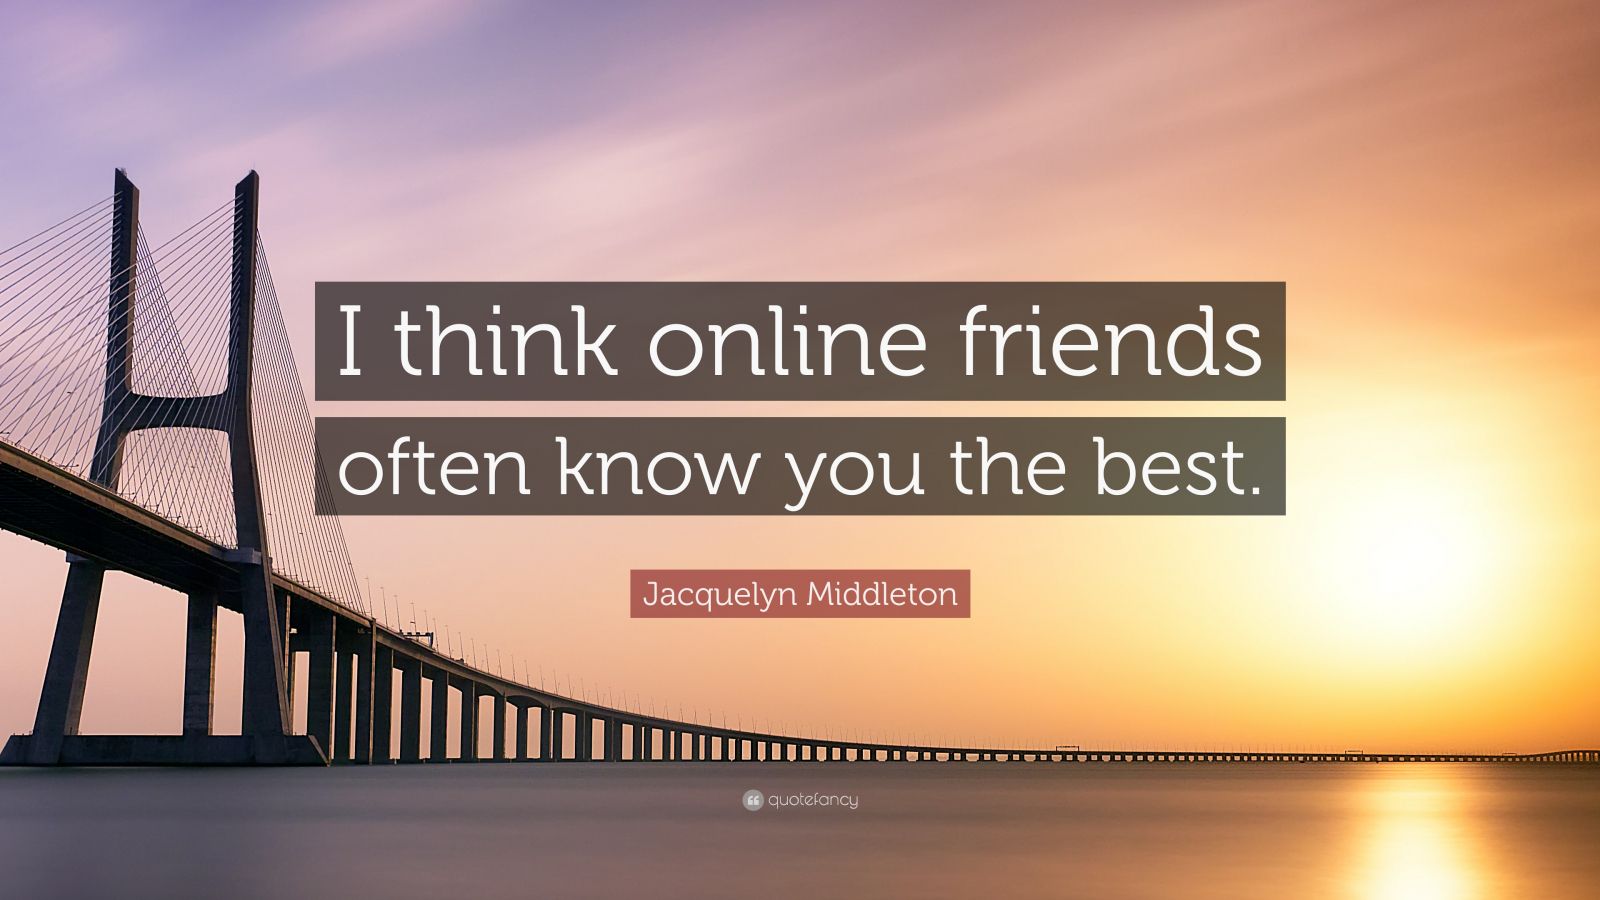 Jacquelyn Middleton Quote: “I think online friends often know you